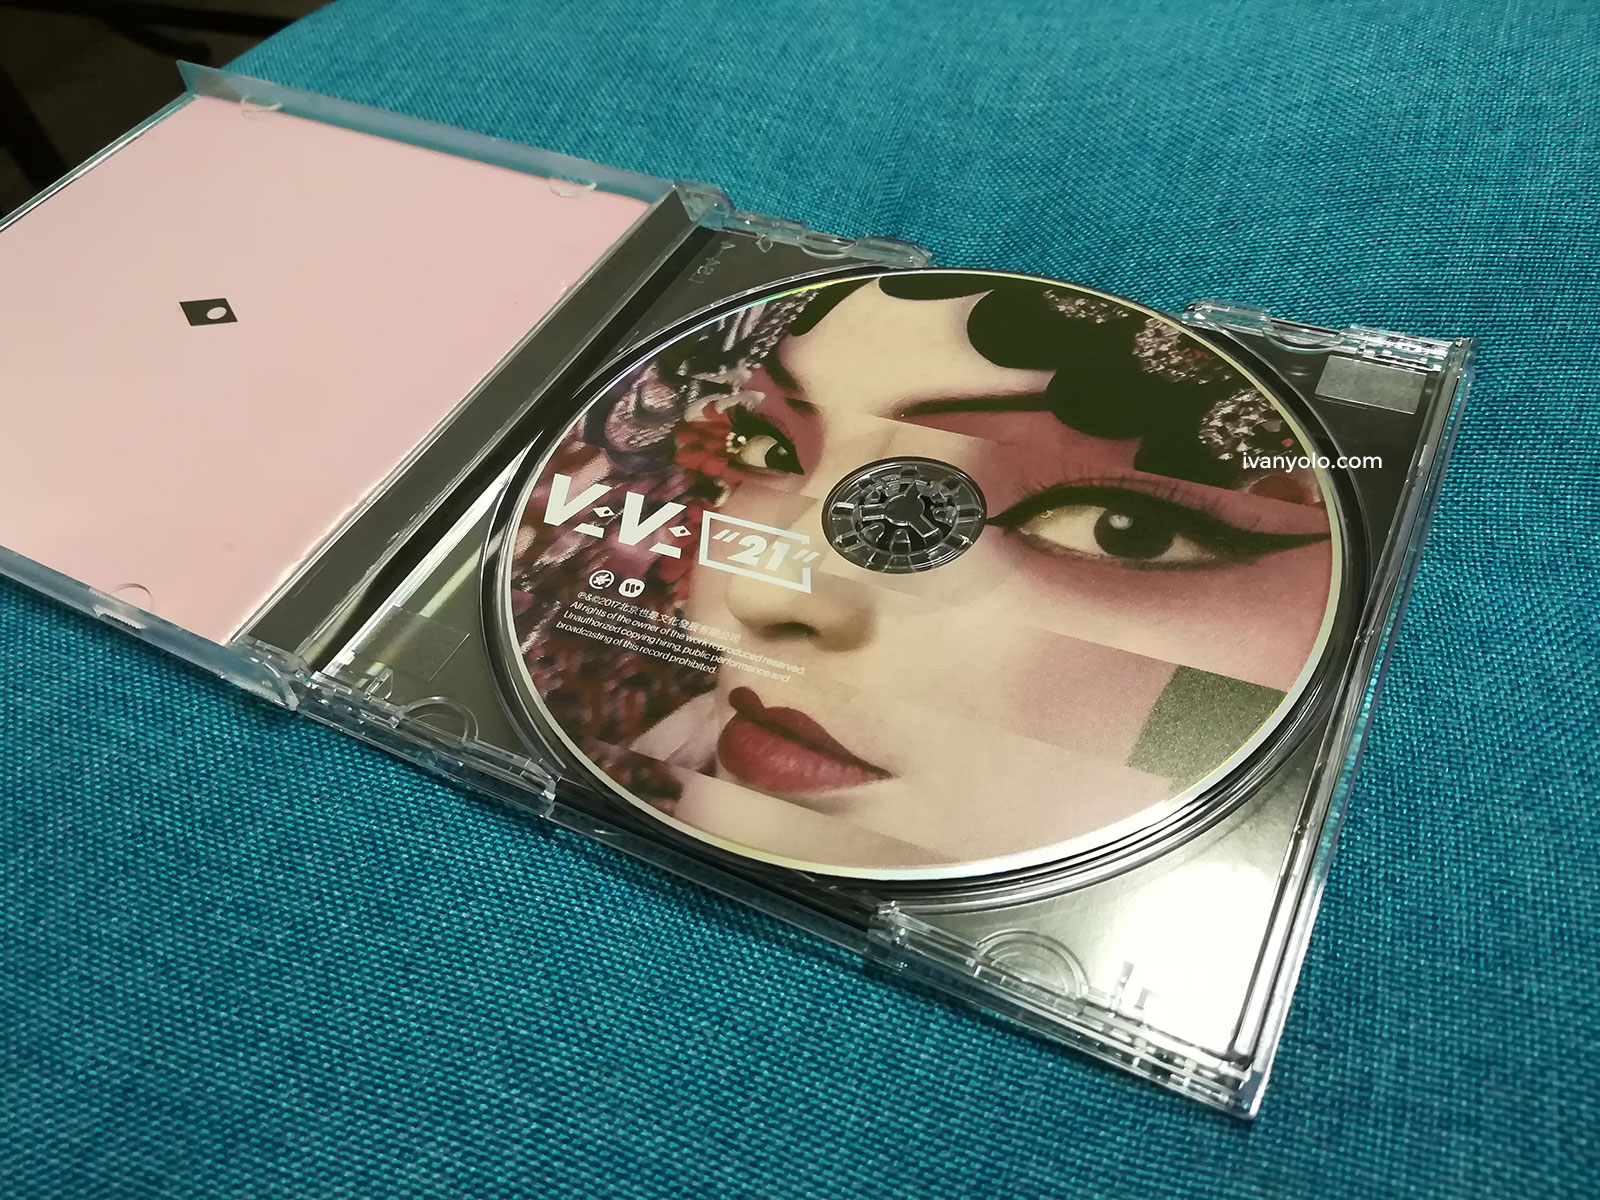 21 VAVA CD Review